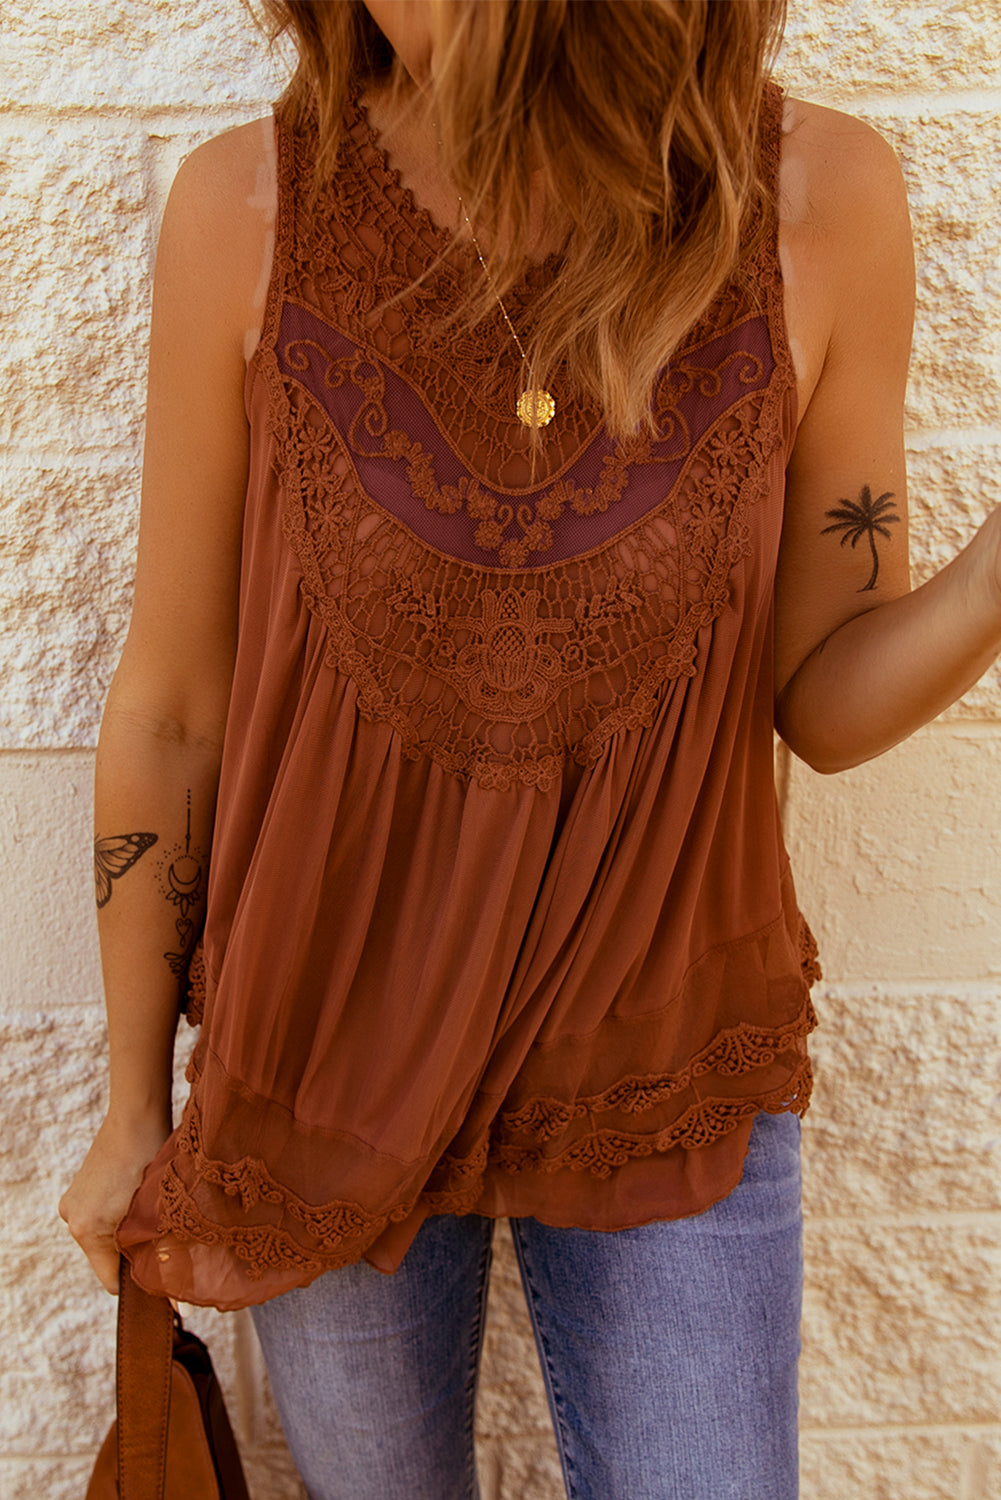 Lace Detail Button Back Sleeveless Top